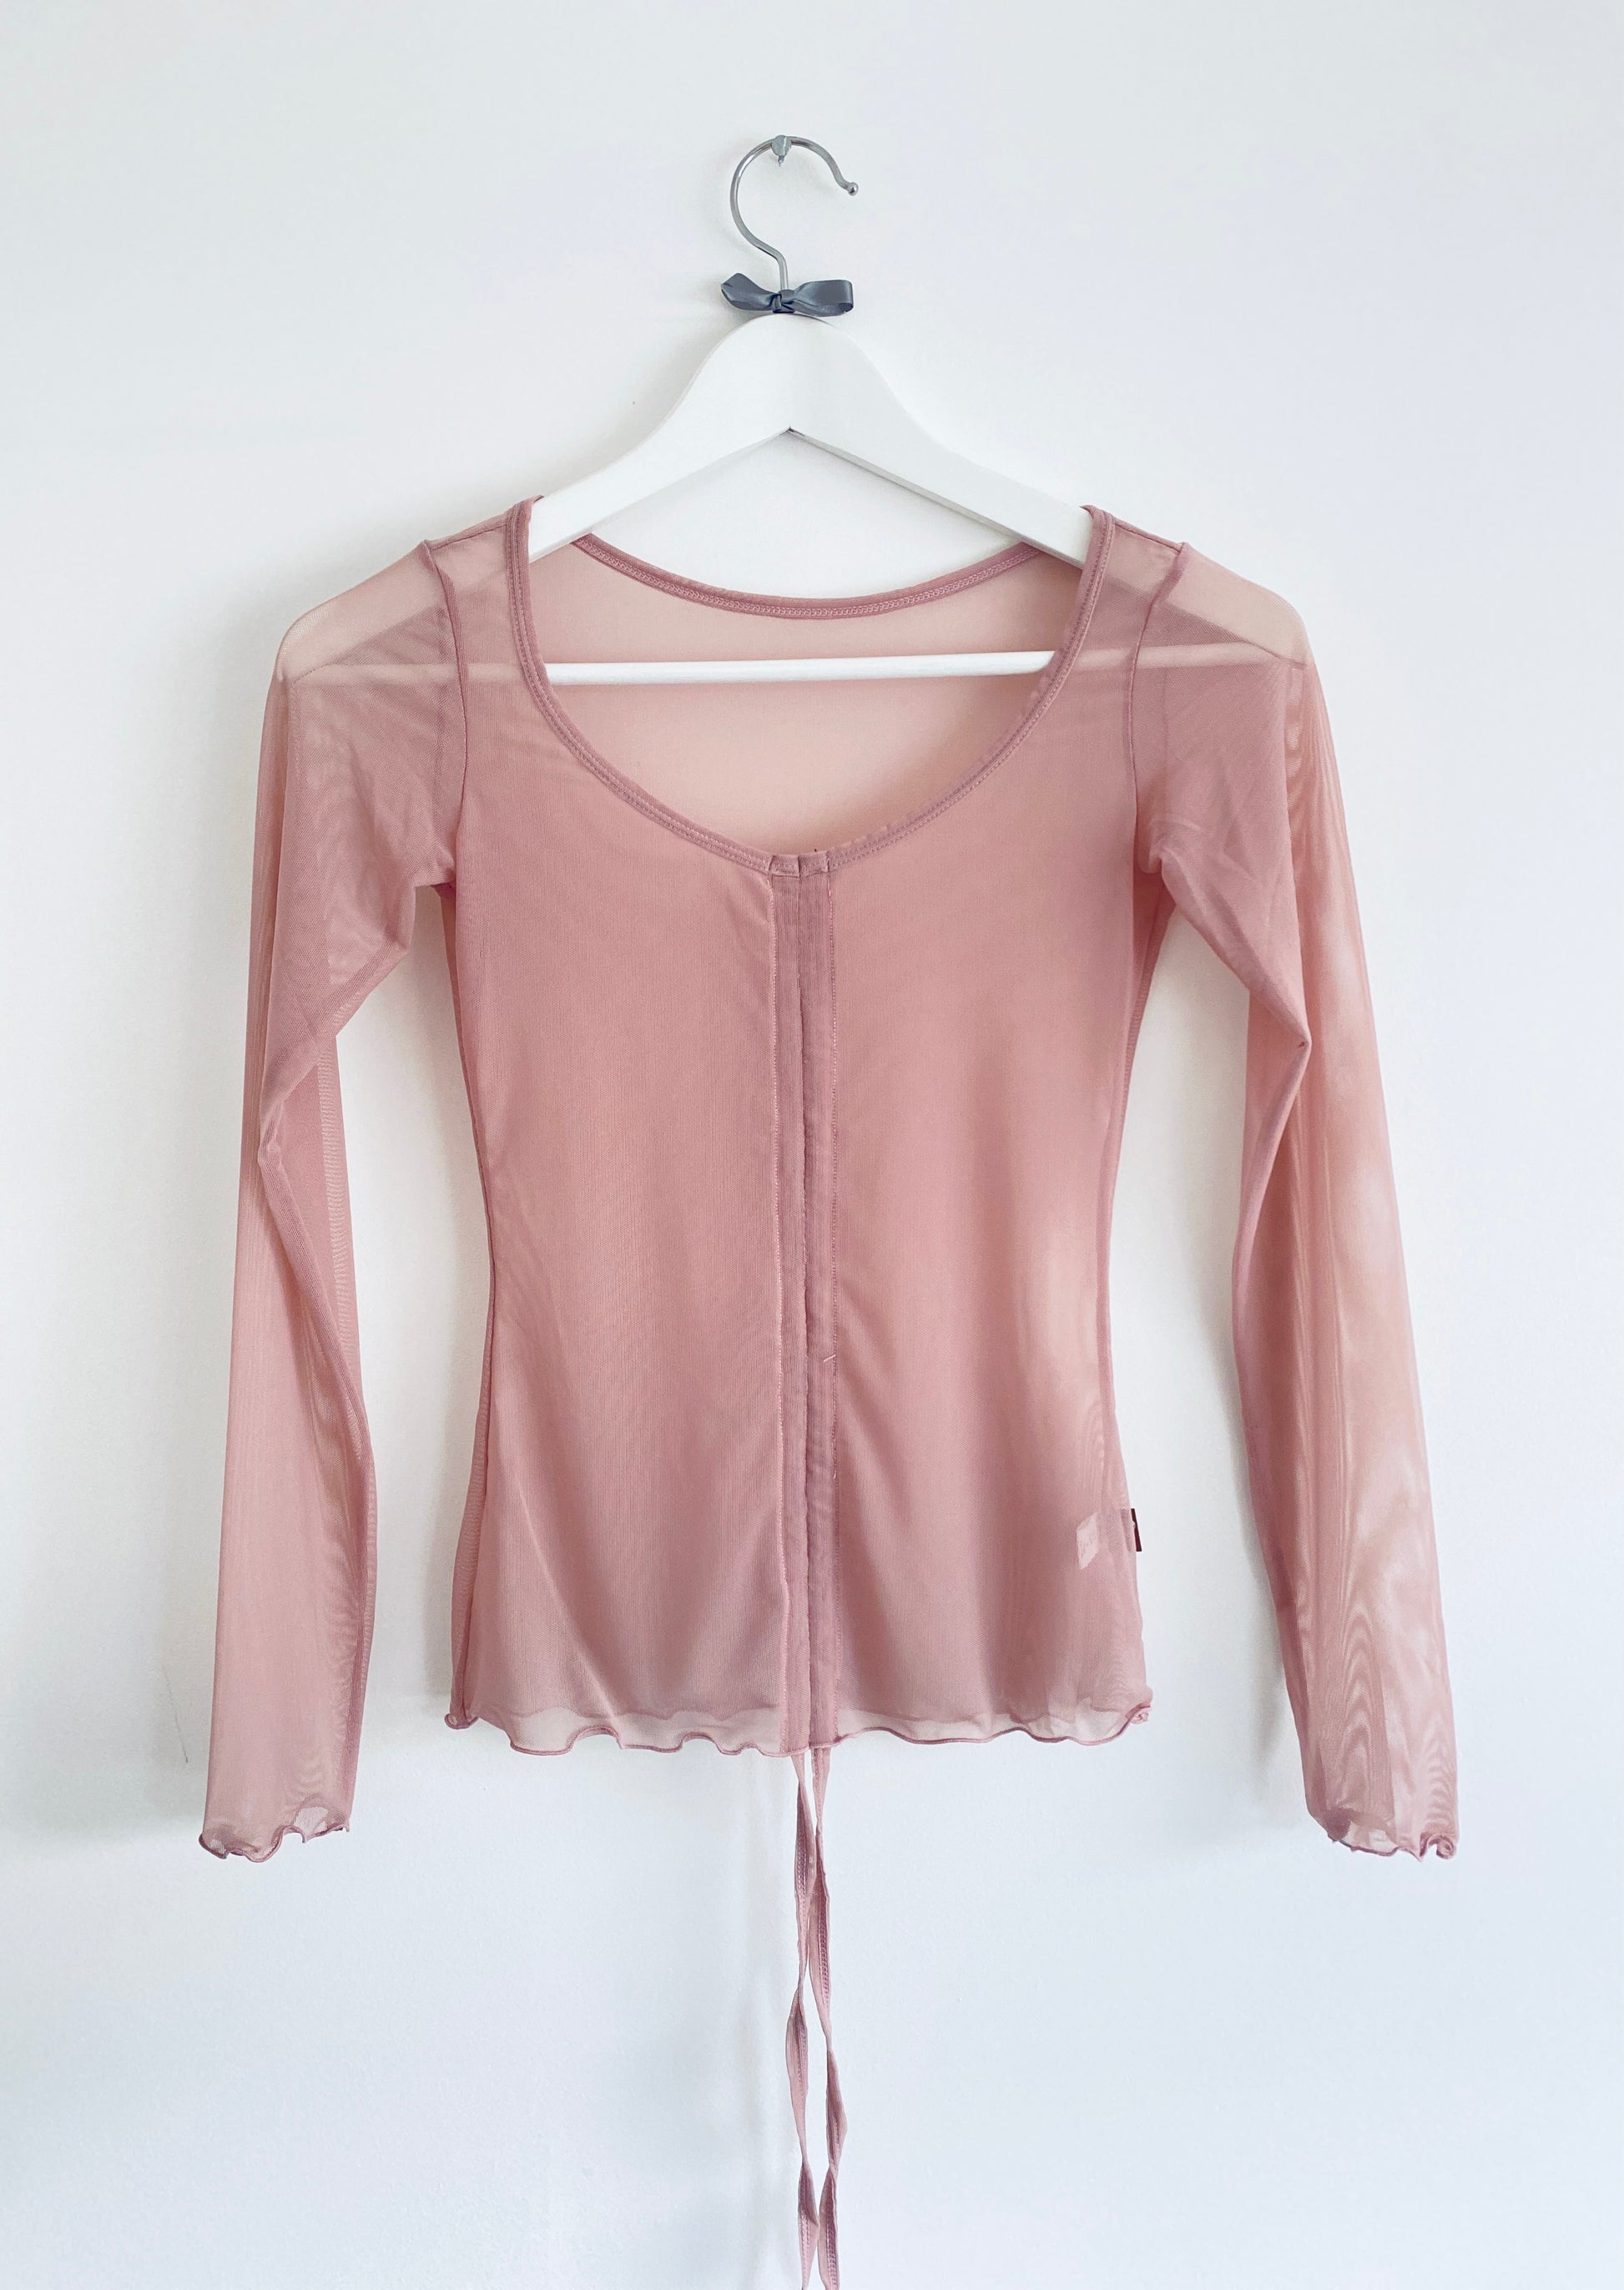 Gathered Mesh Lyrical Top in Dusky Pink from The Collective Dancewear